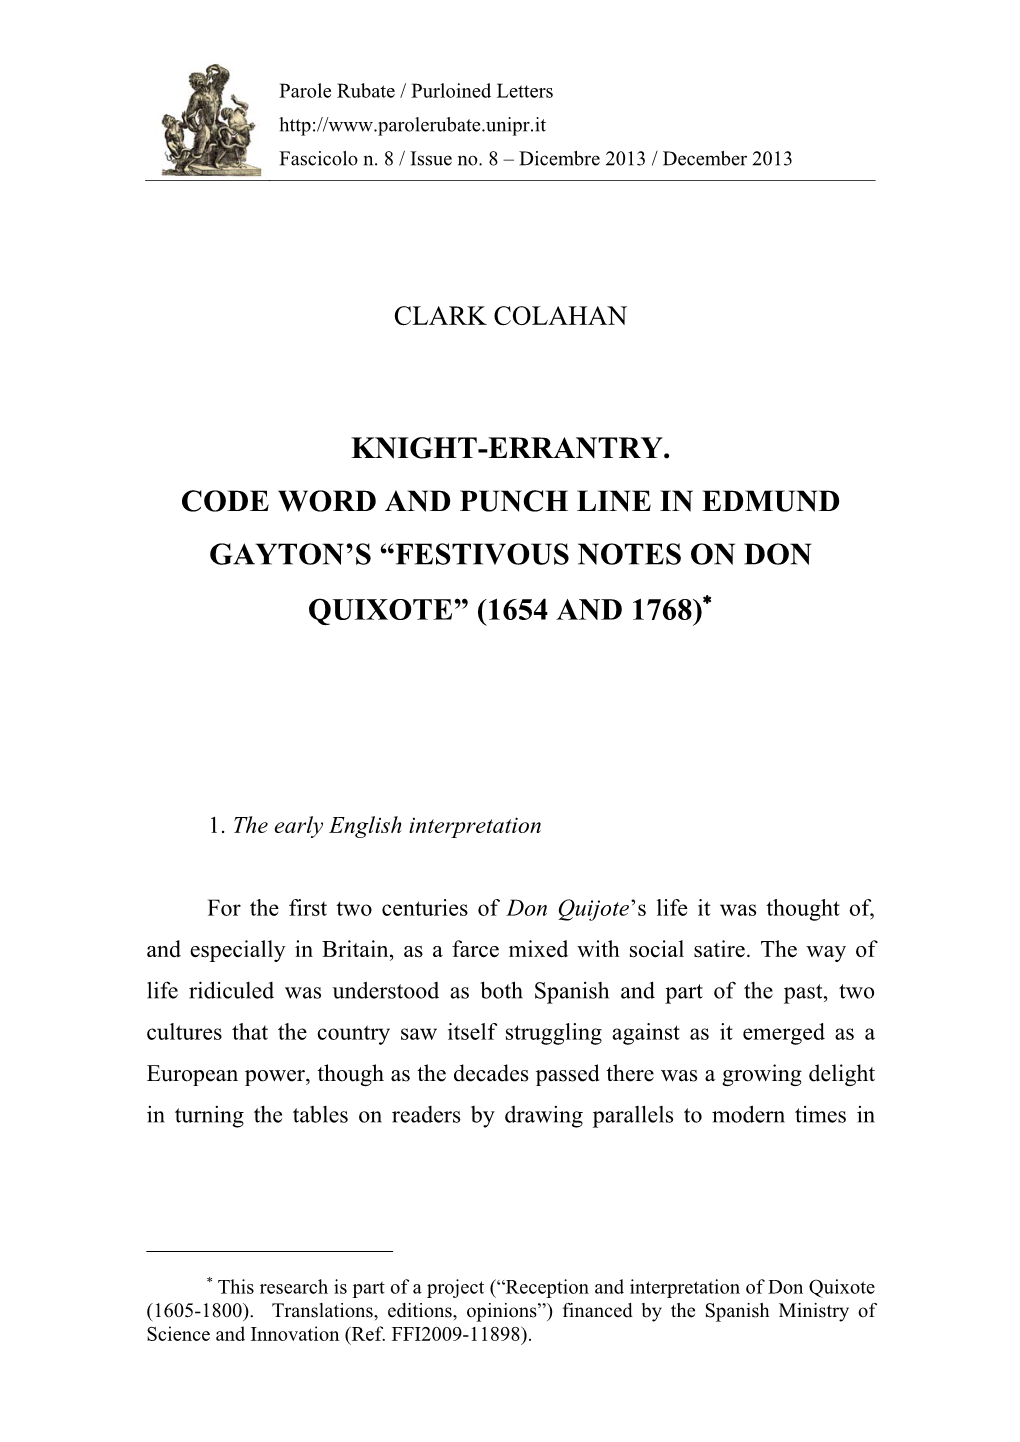 Knight-Errantry. Code Word and Punch Line in Edmund Gayton's